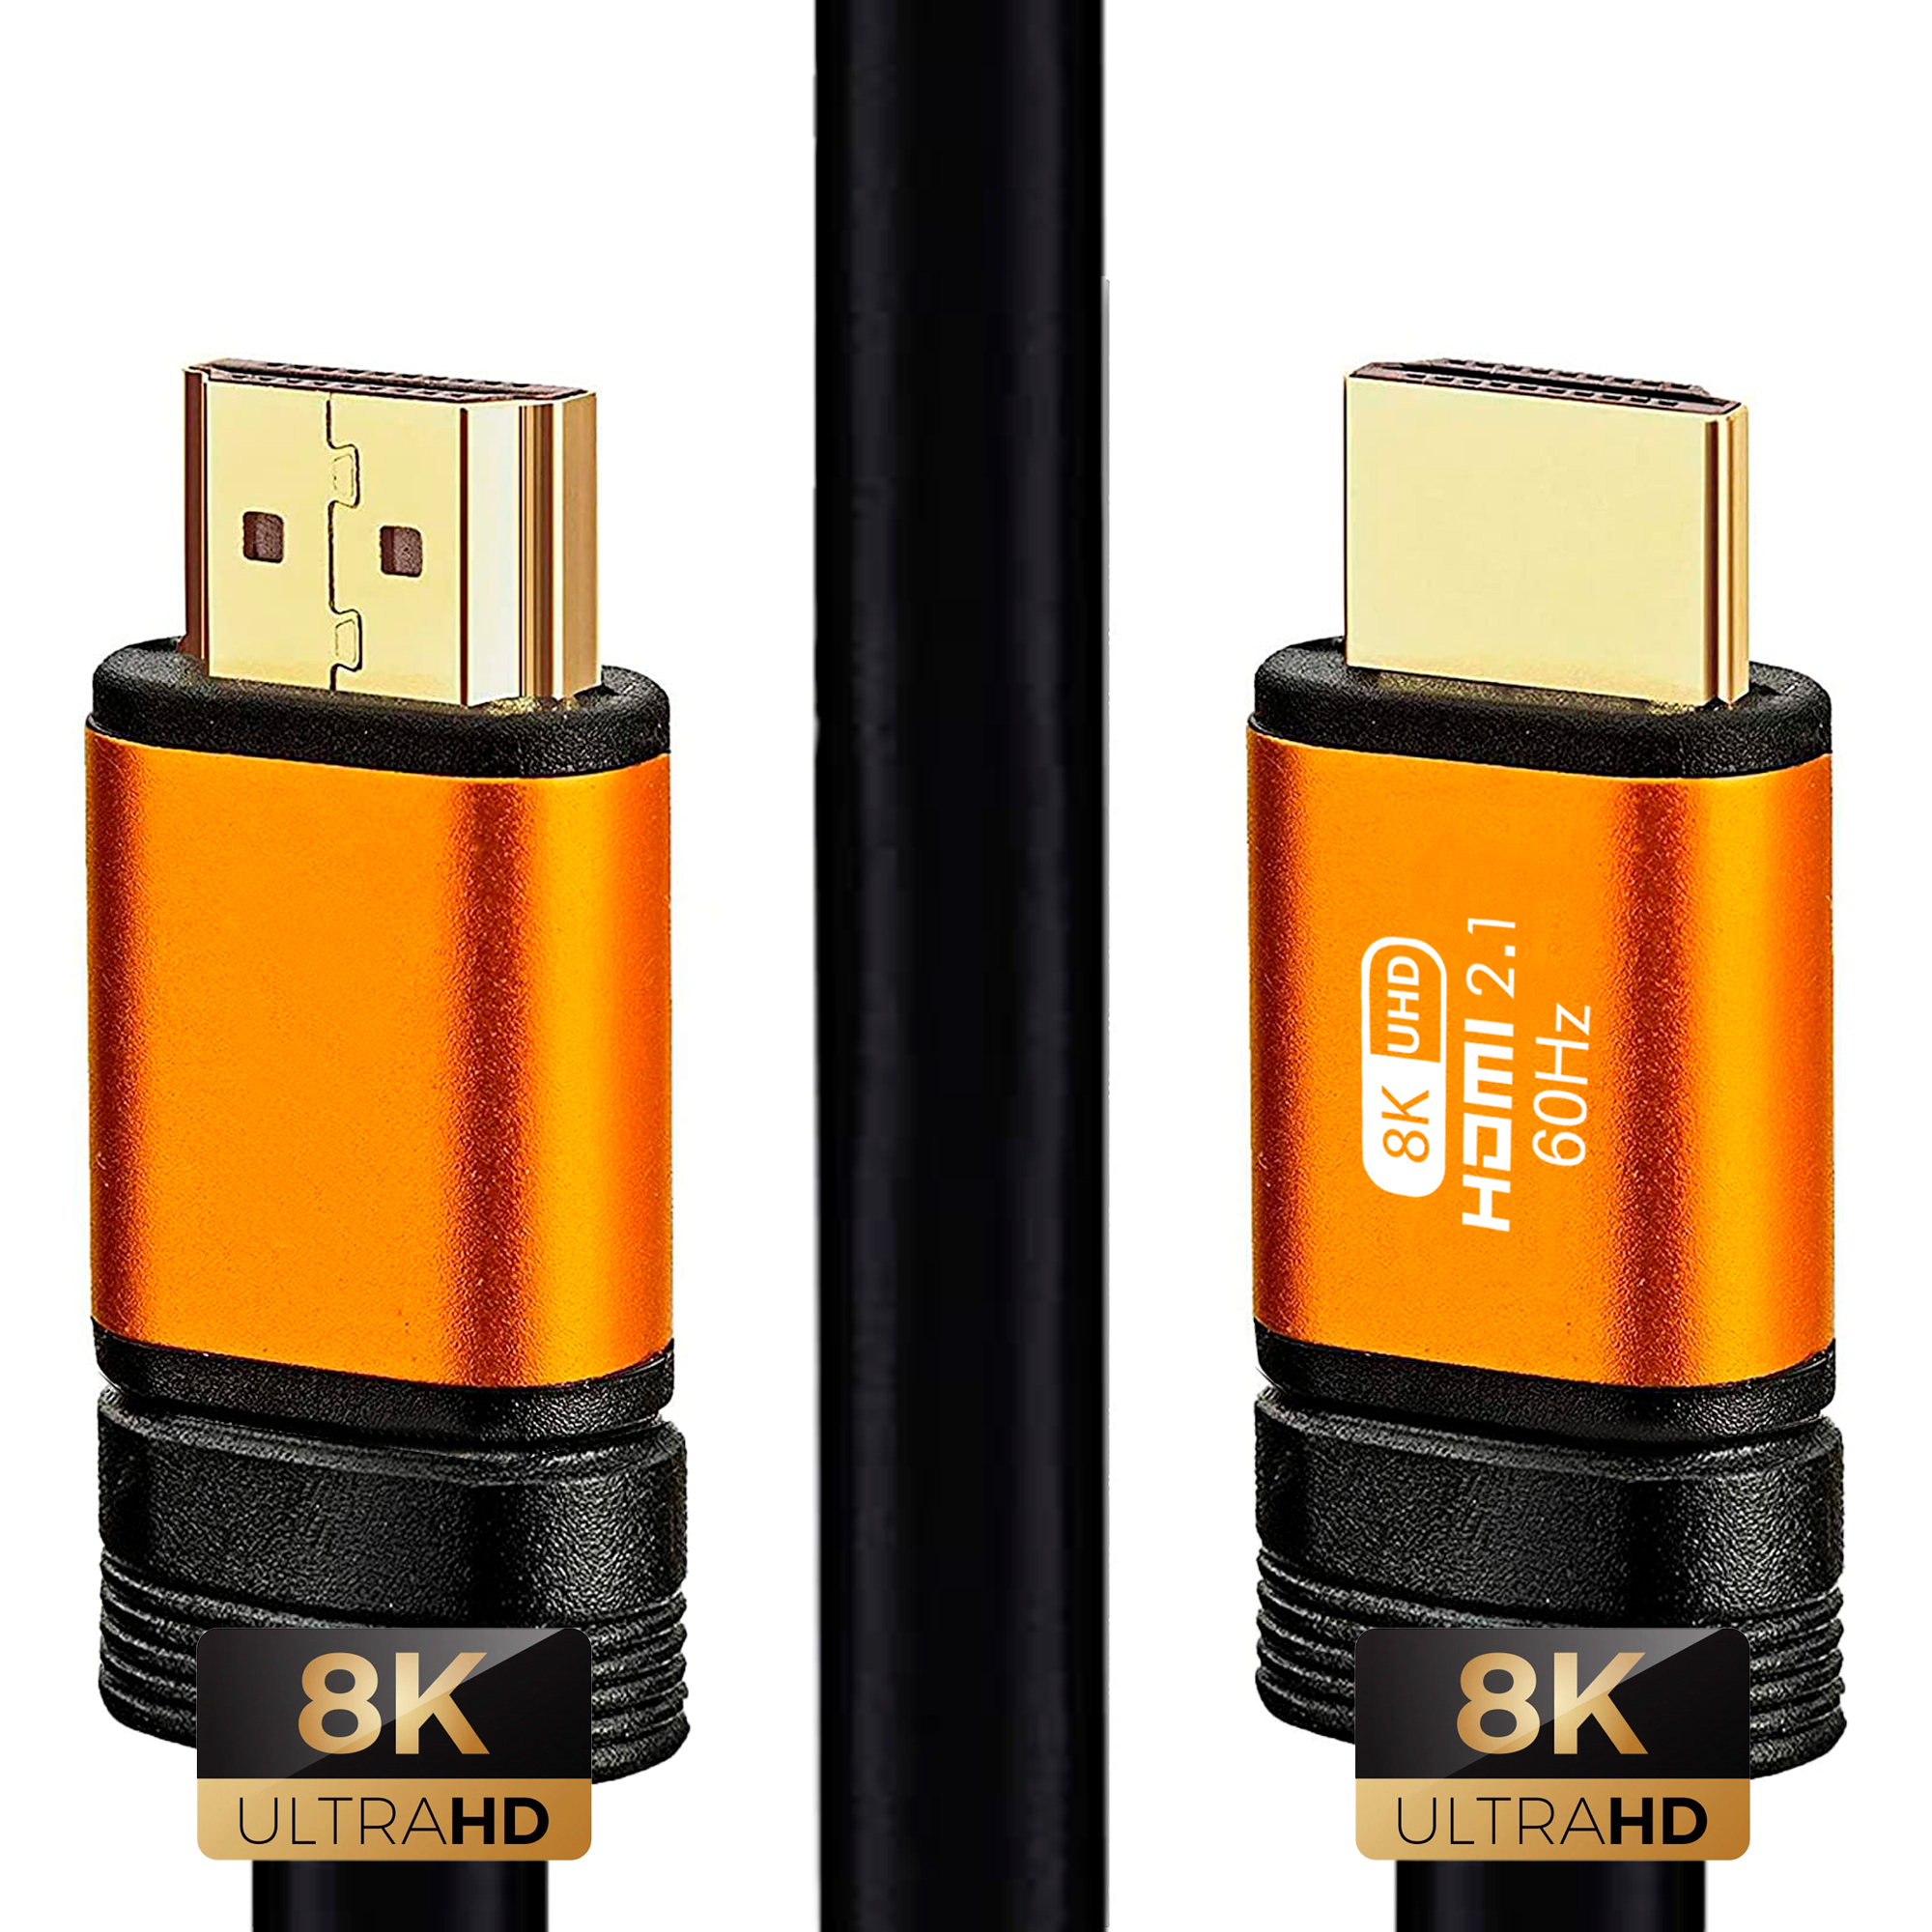 Cable HDMI 2.1 de 4 metros 8K 48Gbps > Cable > HDMI cables